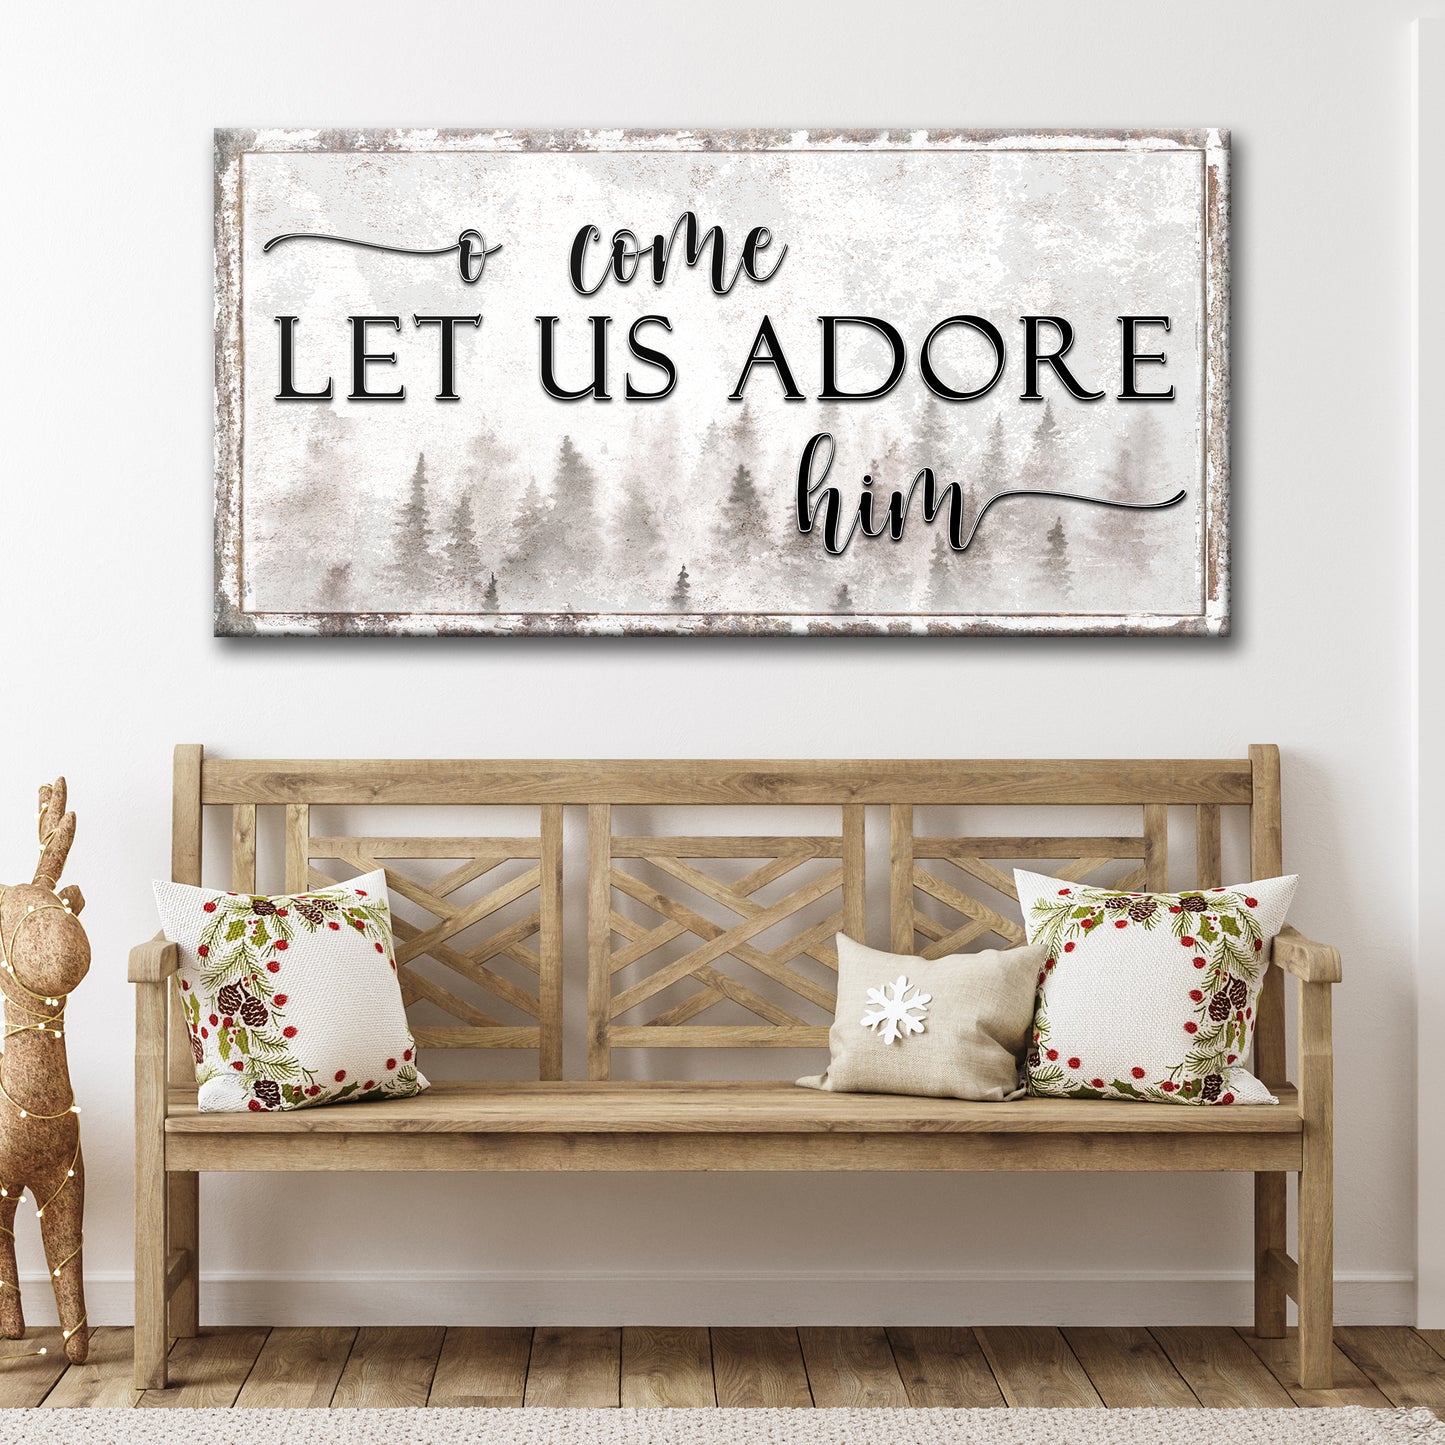 O Come Let Us Adore Him Sign Style 2 - Image by Tailored Canvases